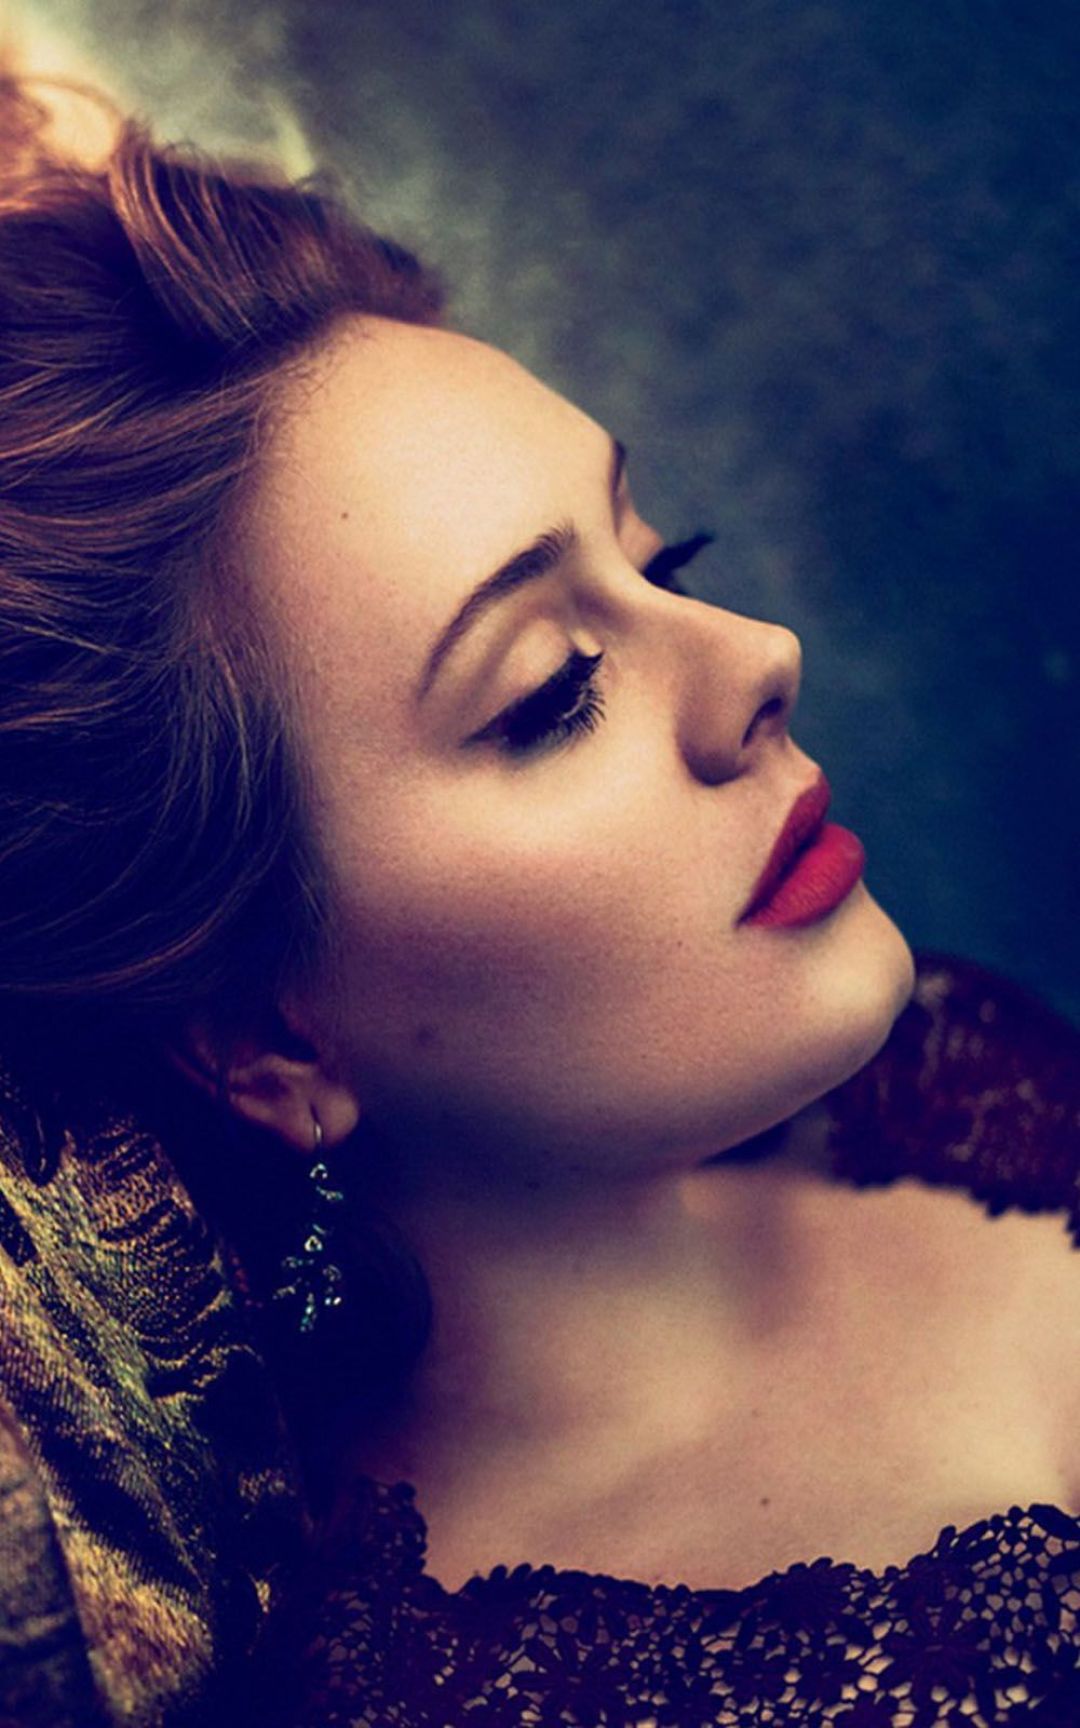 Android, Iphone, Desktop Hd Backgrounds / Wallpapers - Adele Vogue , HD Wallpaper & Backgrounds